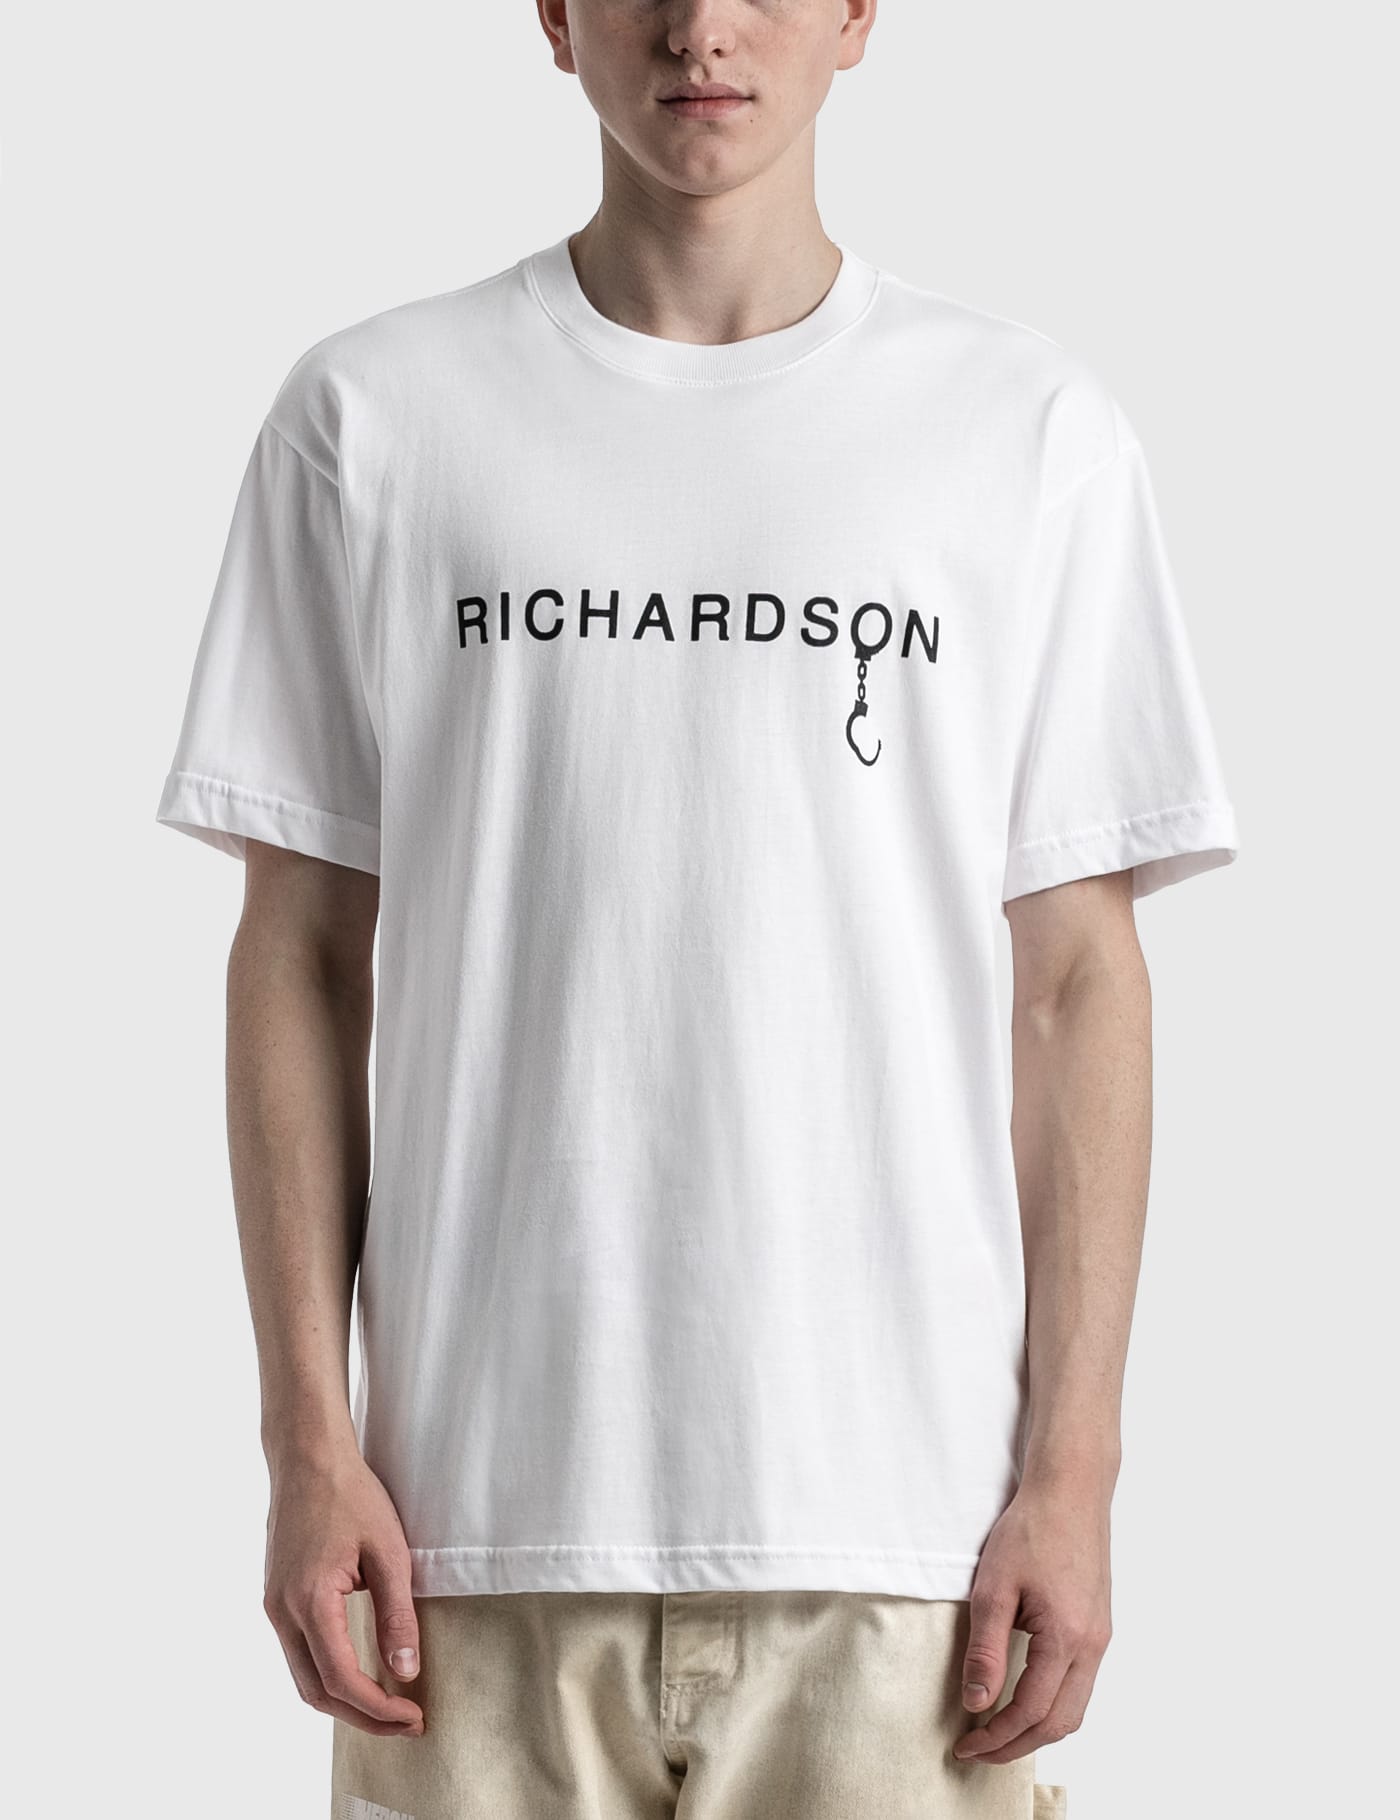 Richardson   Handcuff T shirt   HBX   Globally Curated Fashion and